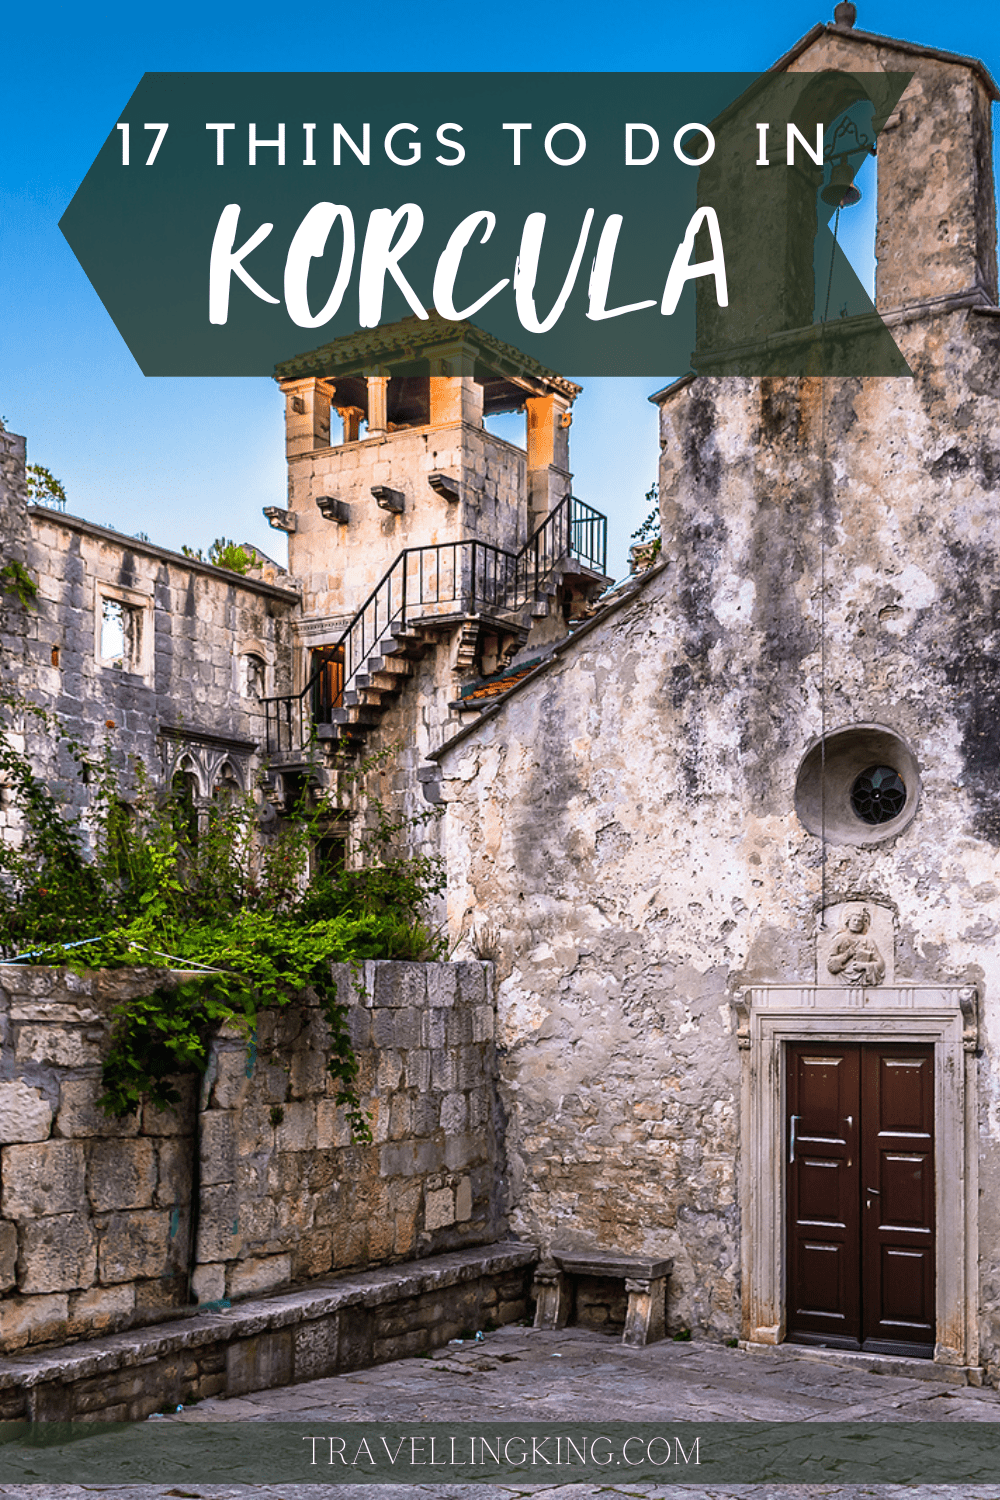 17 things to do in Korcula